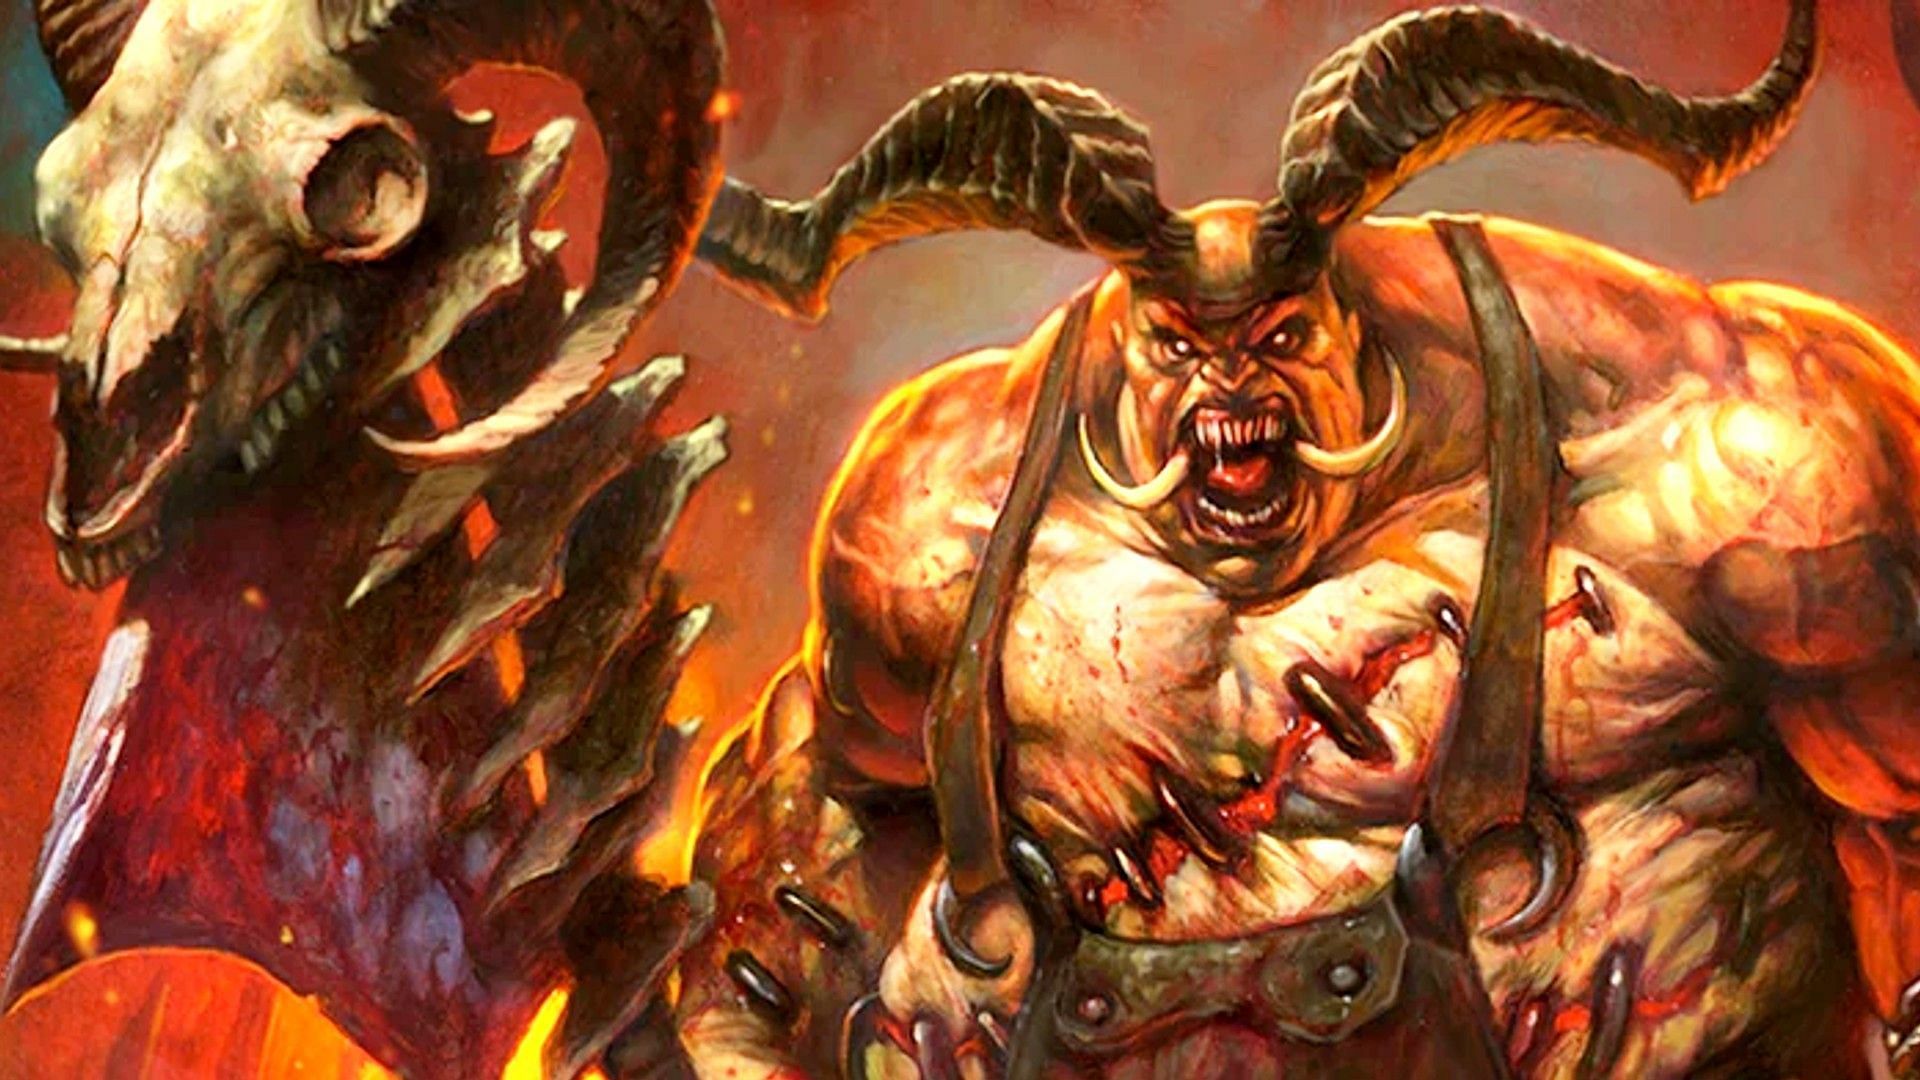 The Butcher is a boss that players will come across randomly while clearing dungeons in Diablo 4. 